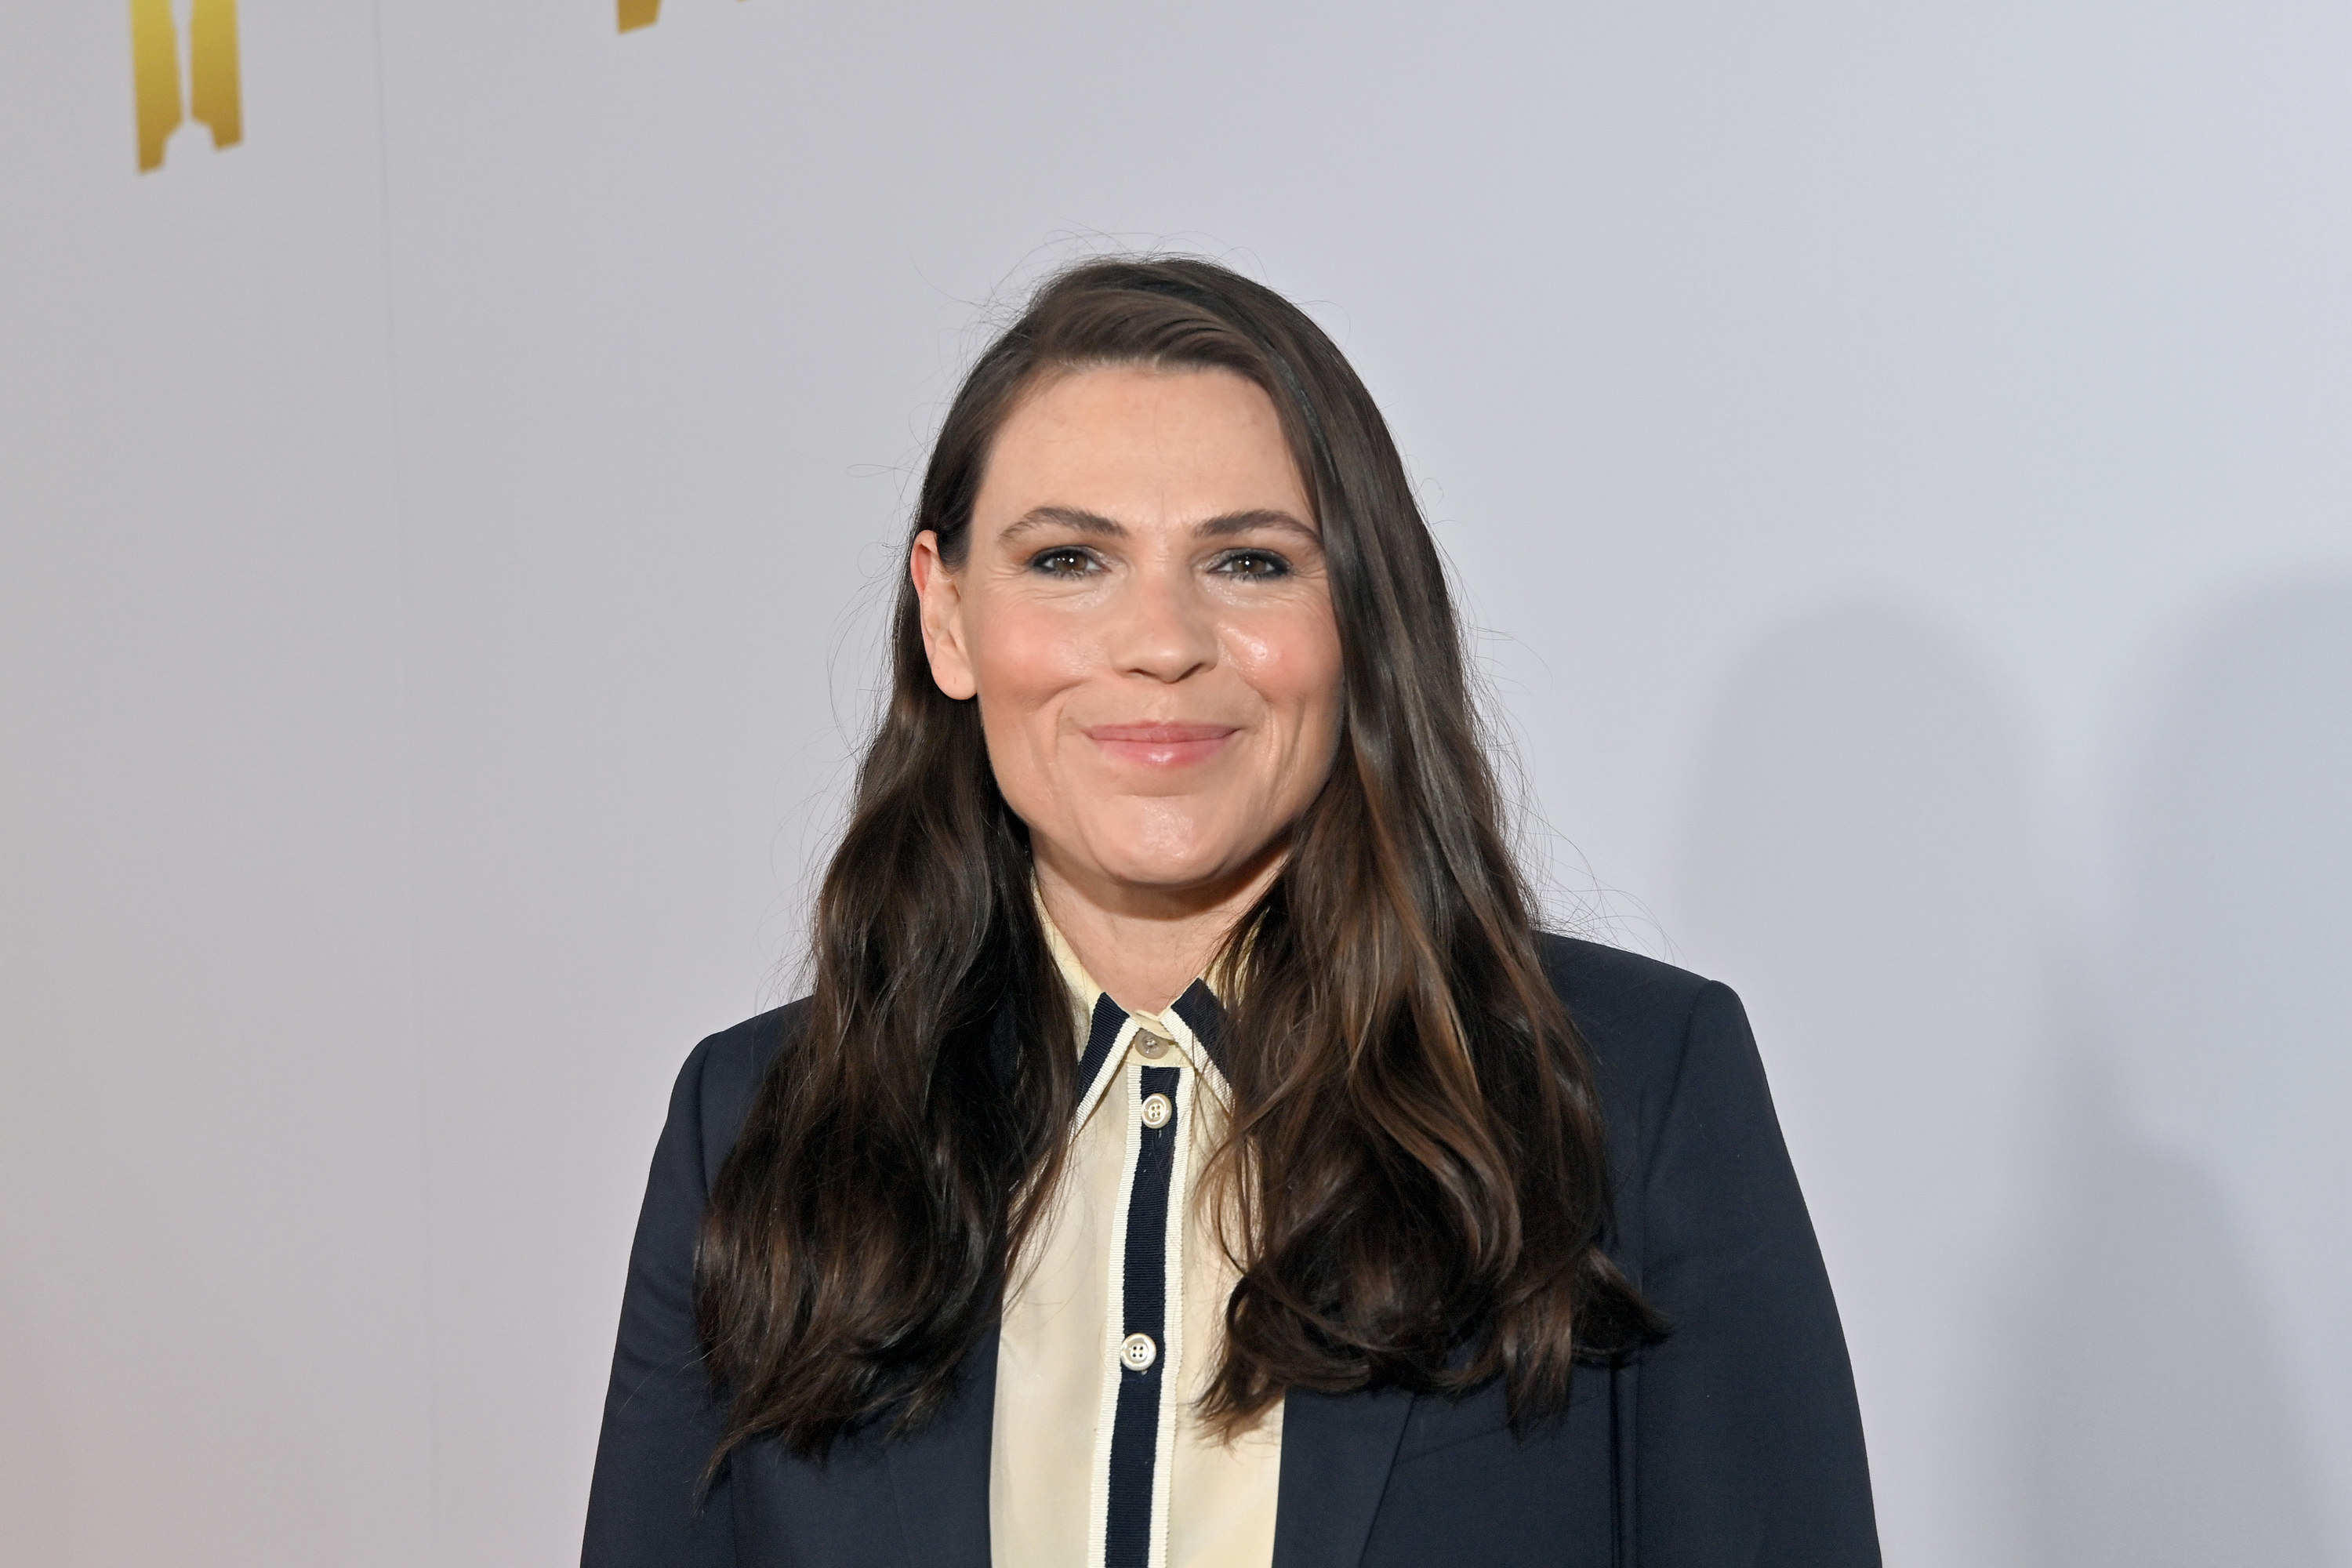 Clea DuVall poses in a black blazer and white button-up shirt